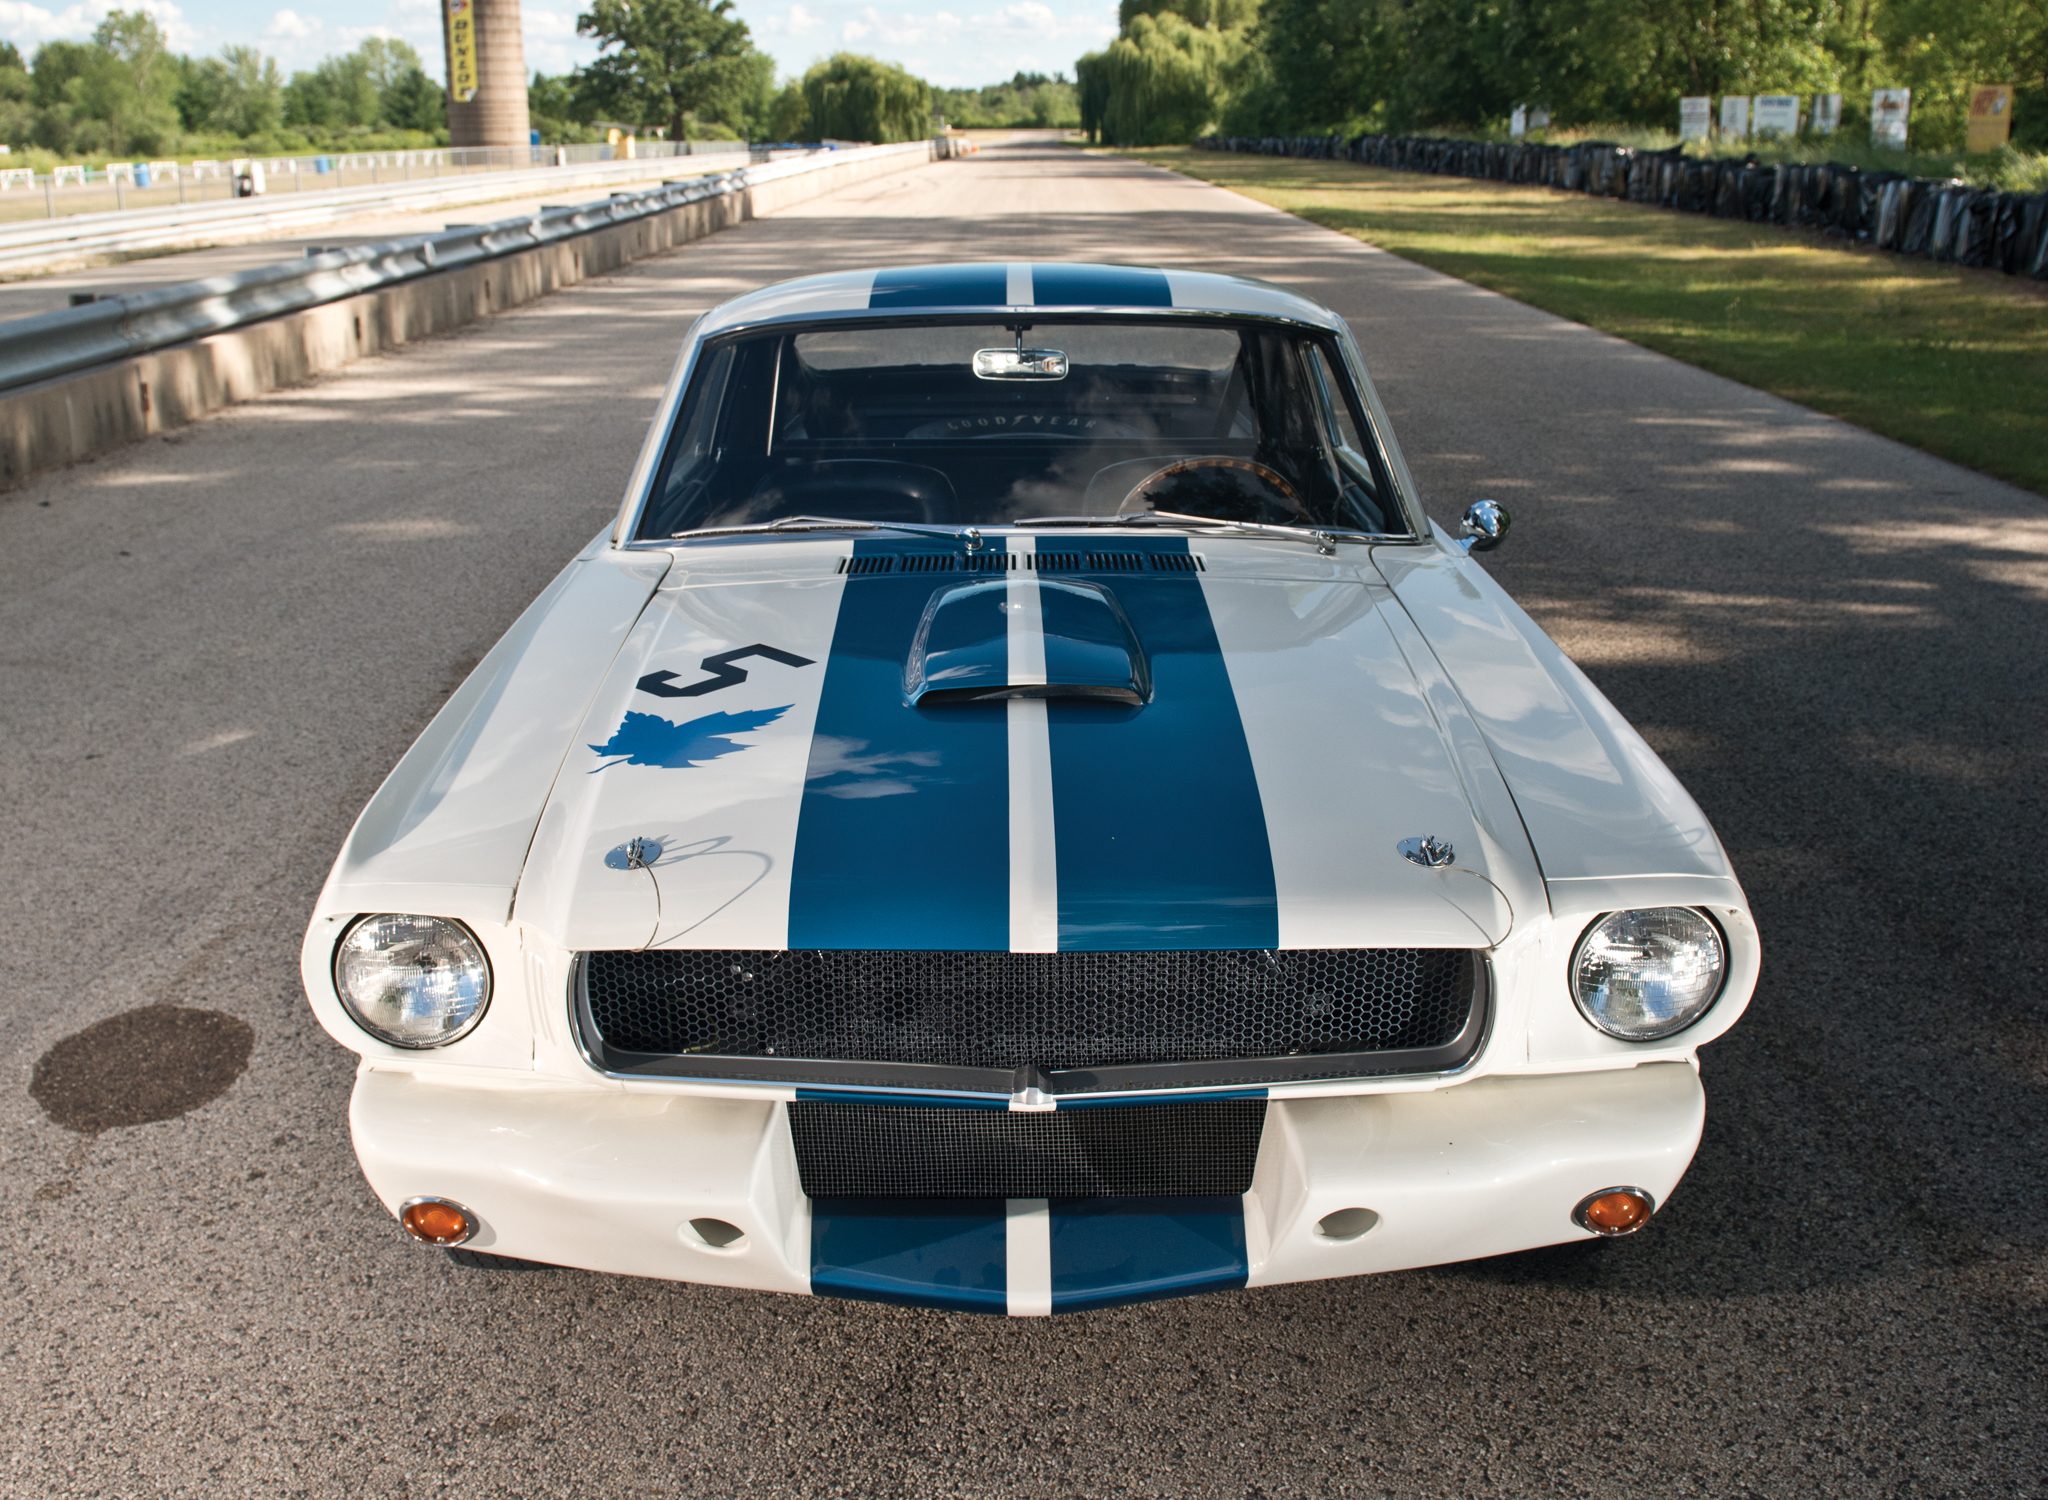 Mustang Of The Day: 1965 Shelby Mustang GT350R